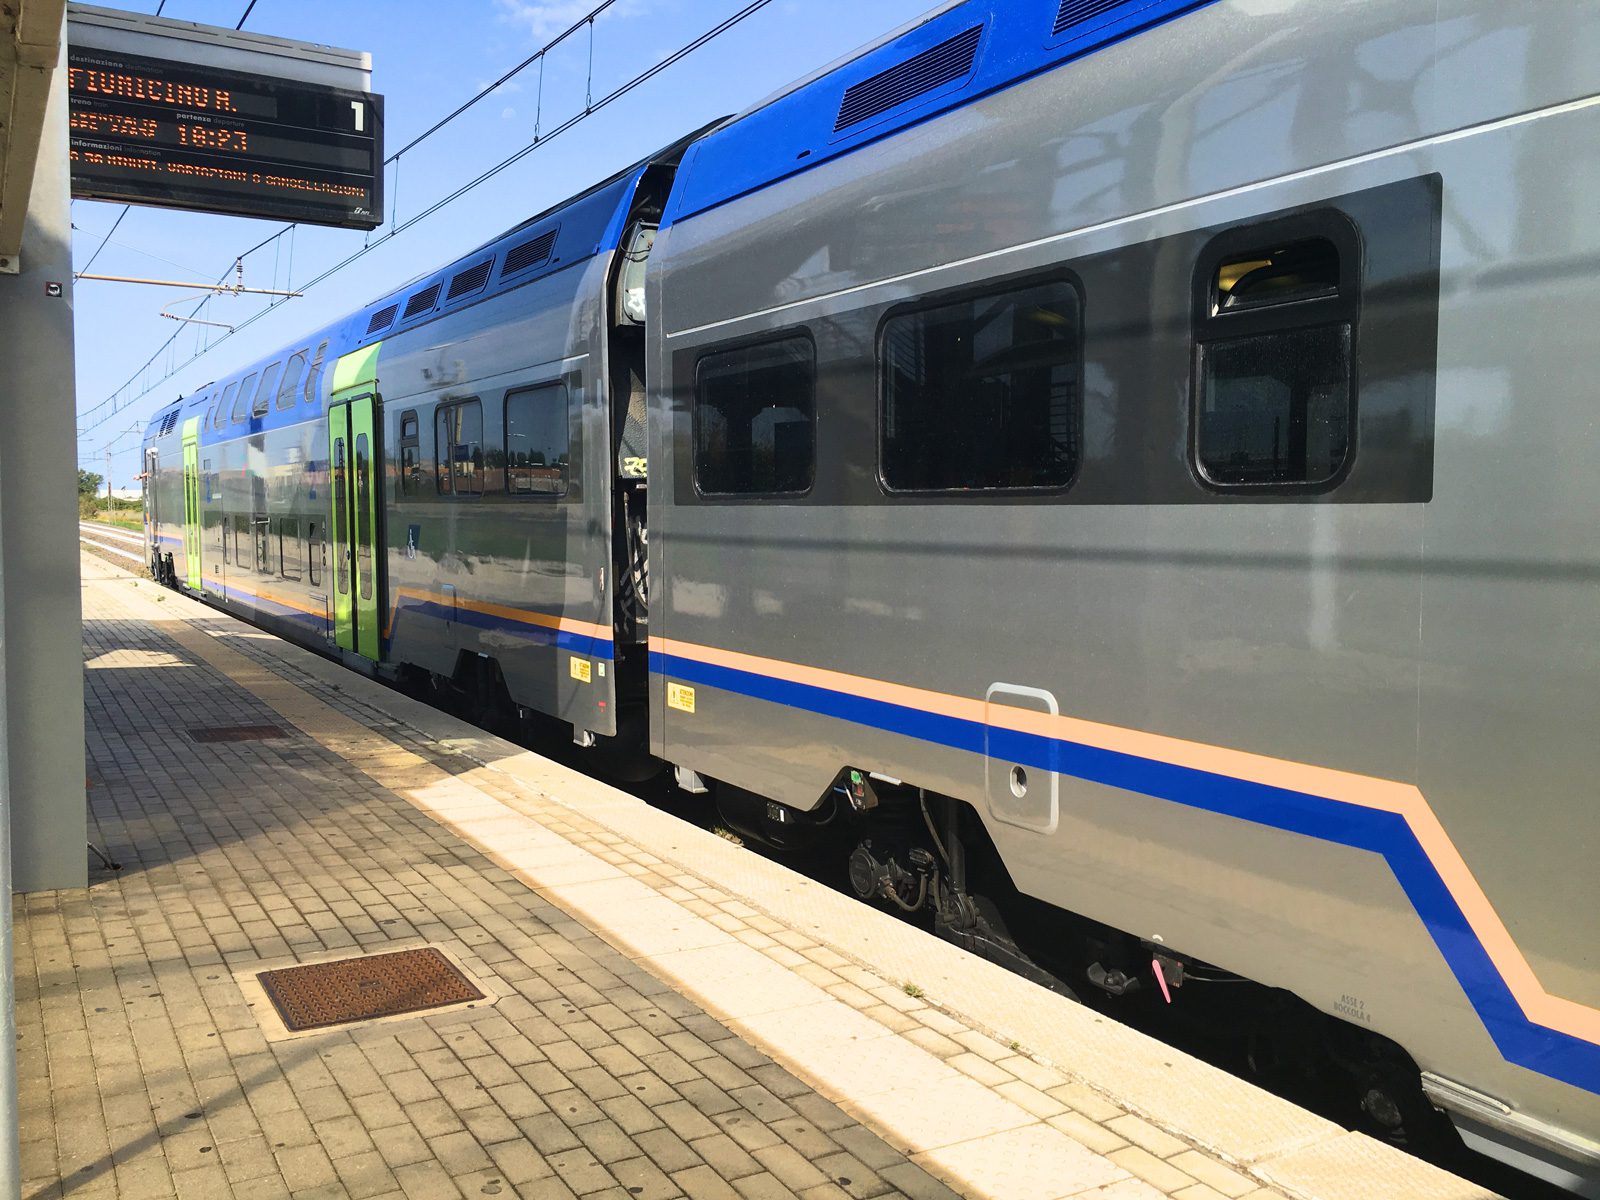 Fiumicino airport local train waiting on the platform